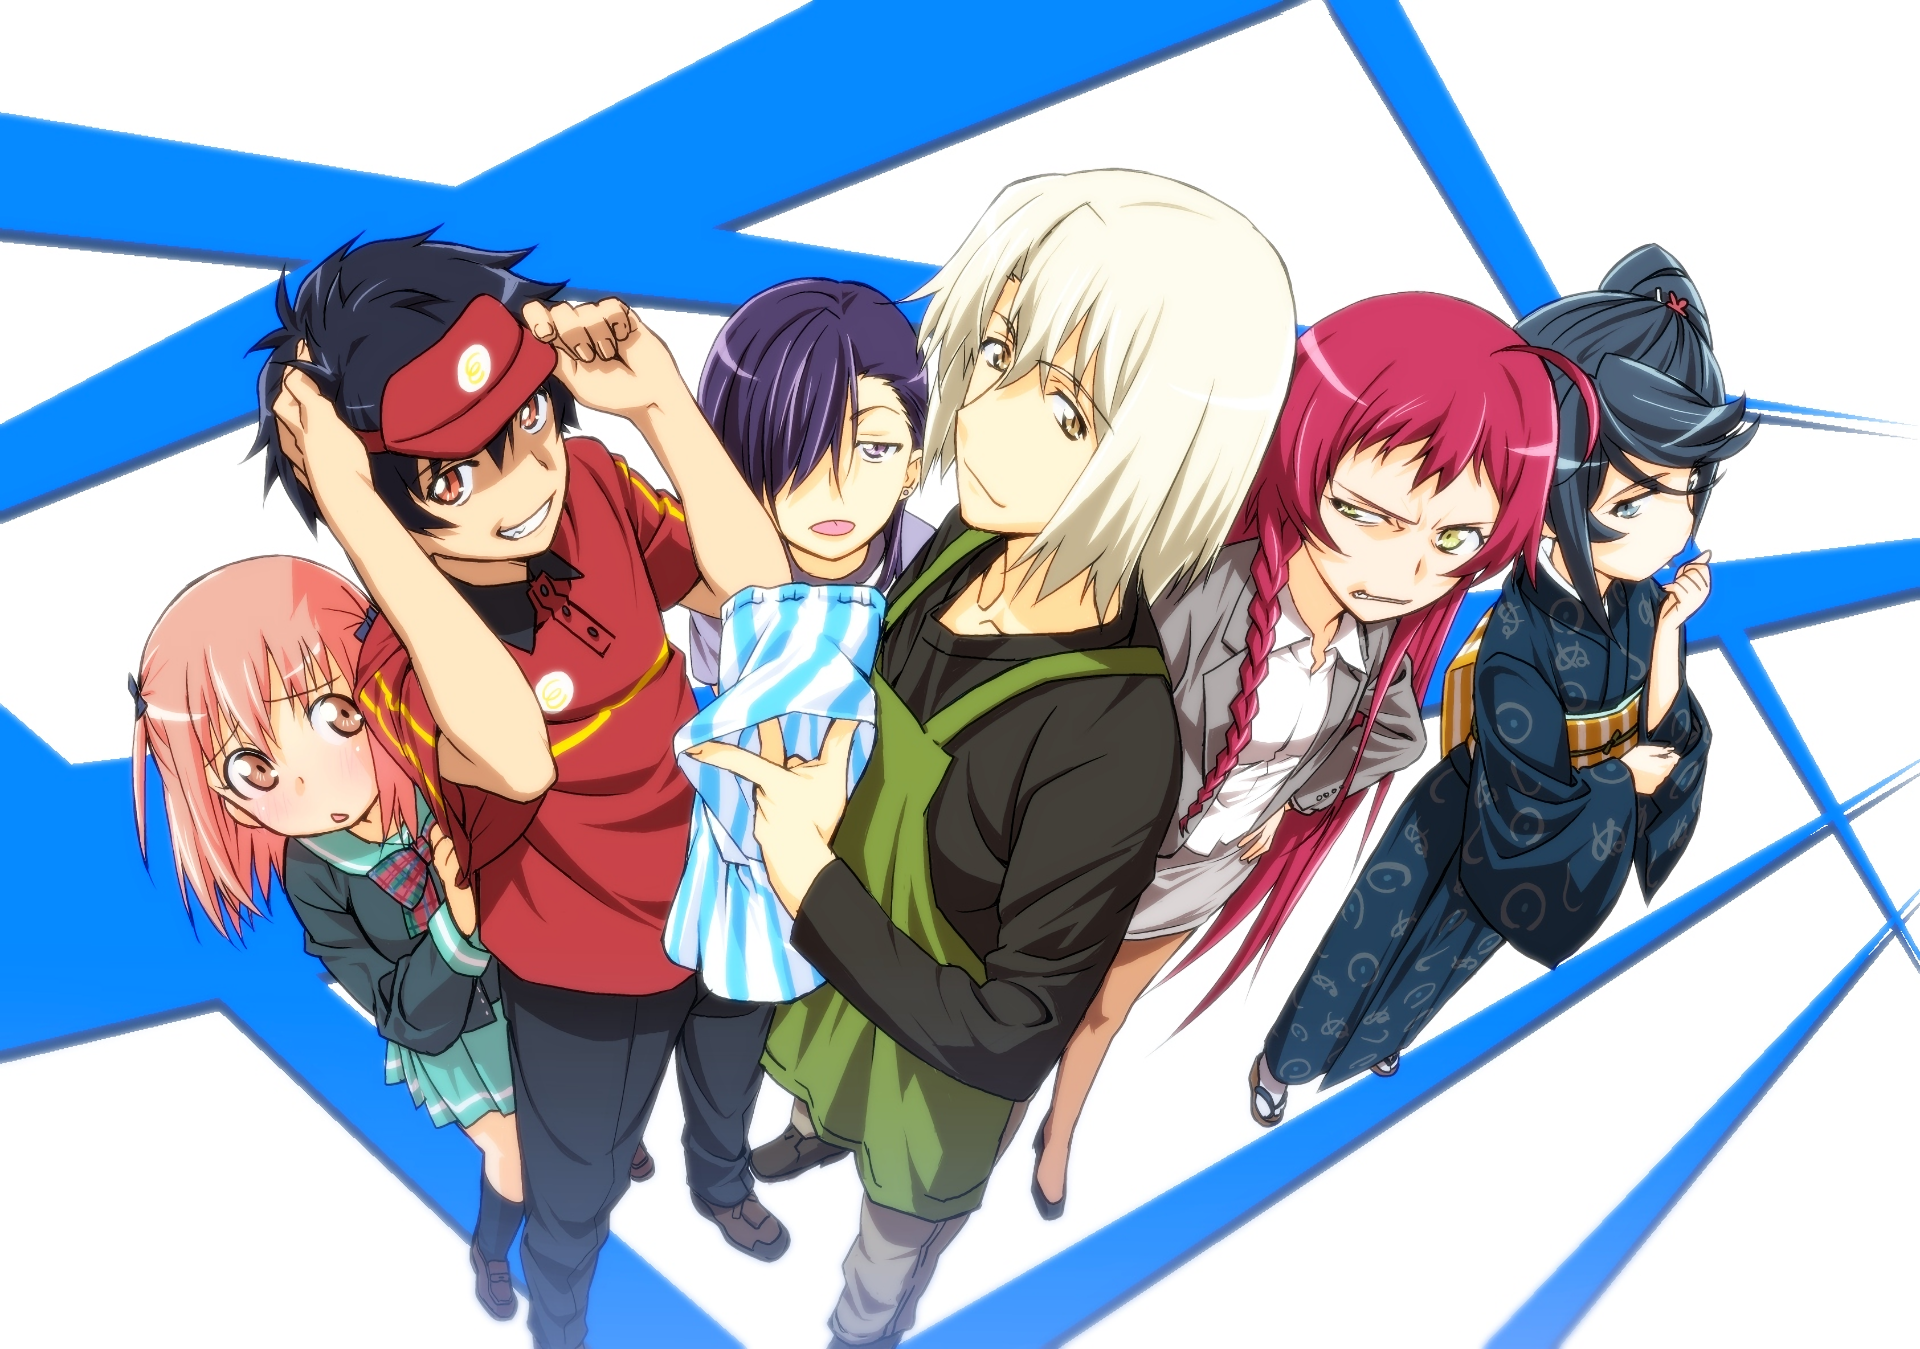 Anime The Devil Is a Part-Timer! HD Wallpaper by ＪＯＹ　フル　ＳＵＮ